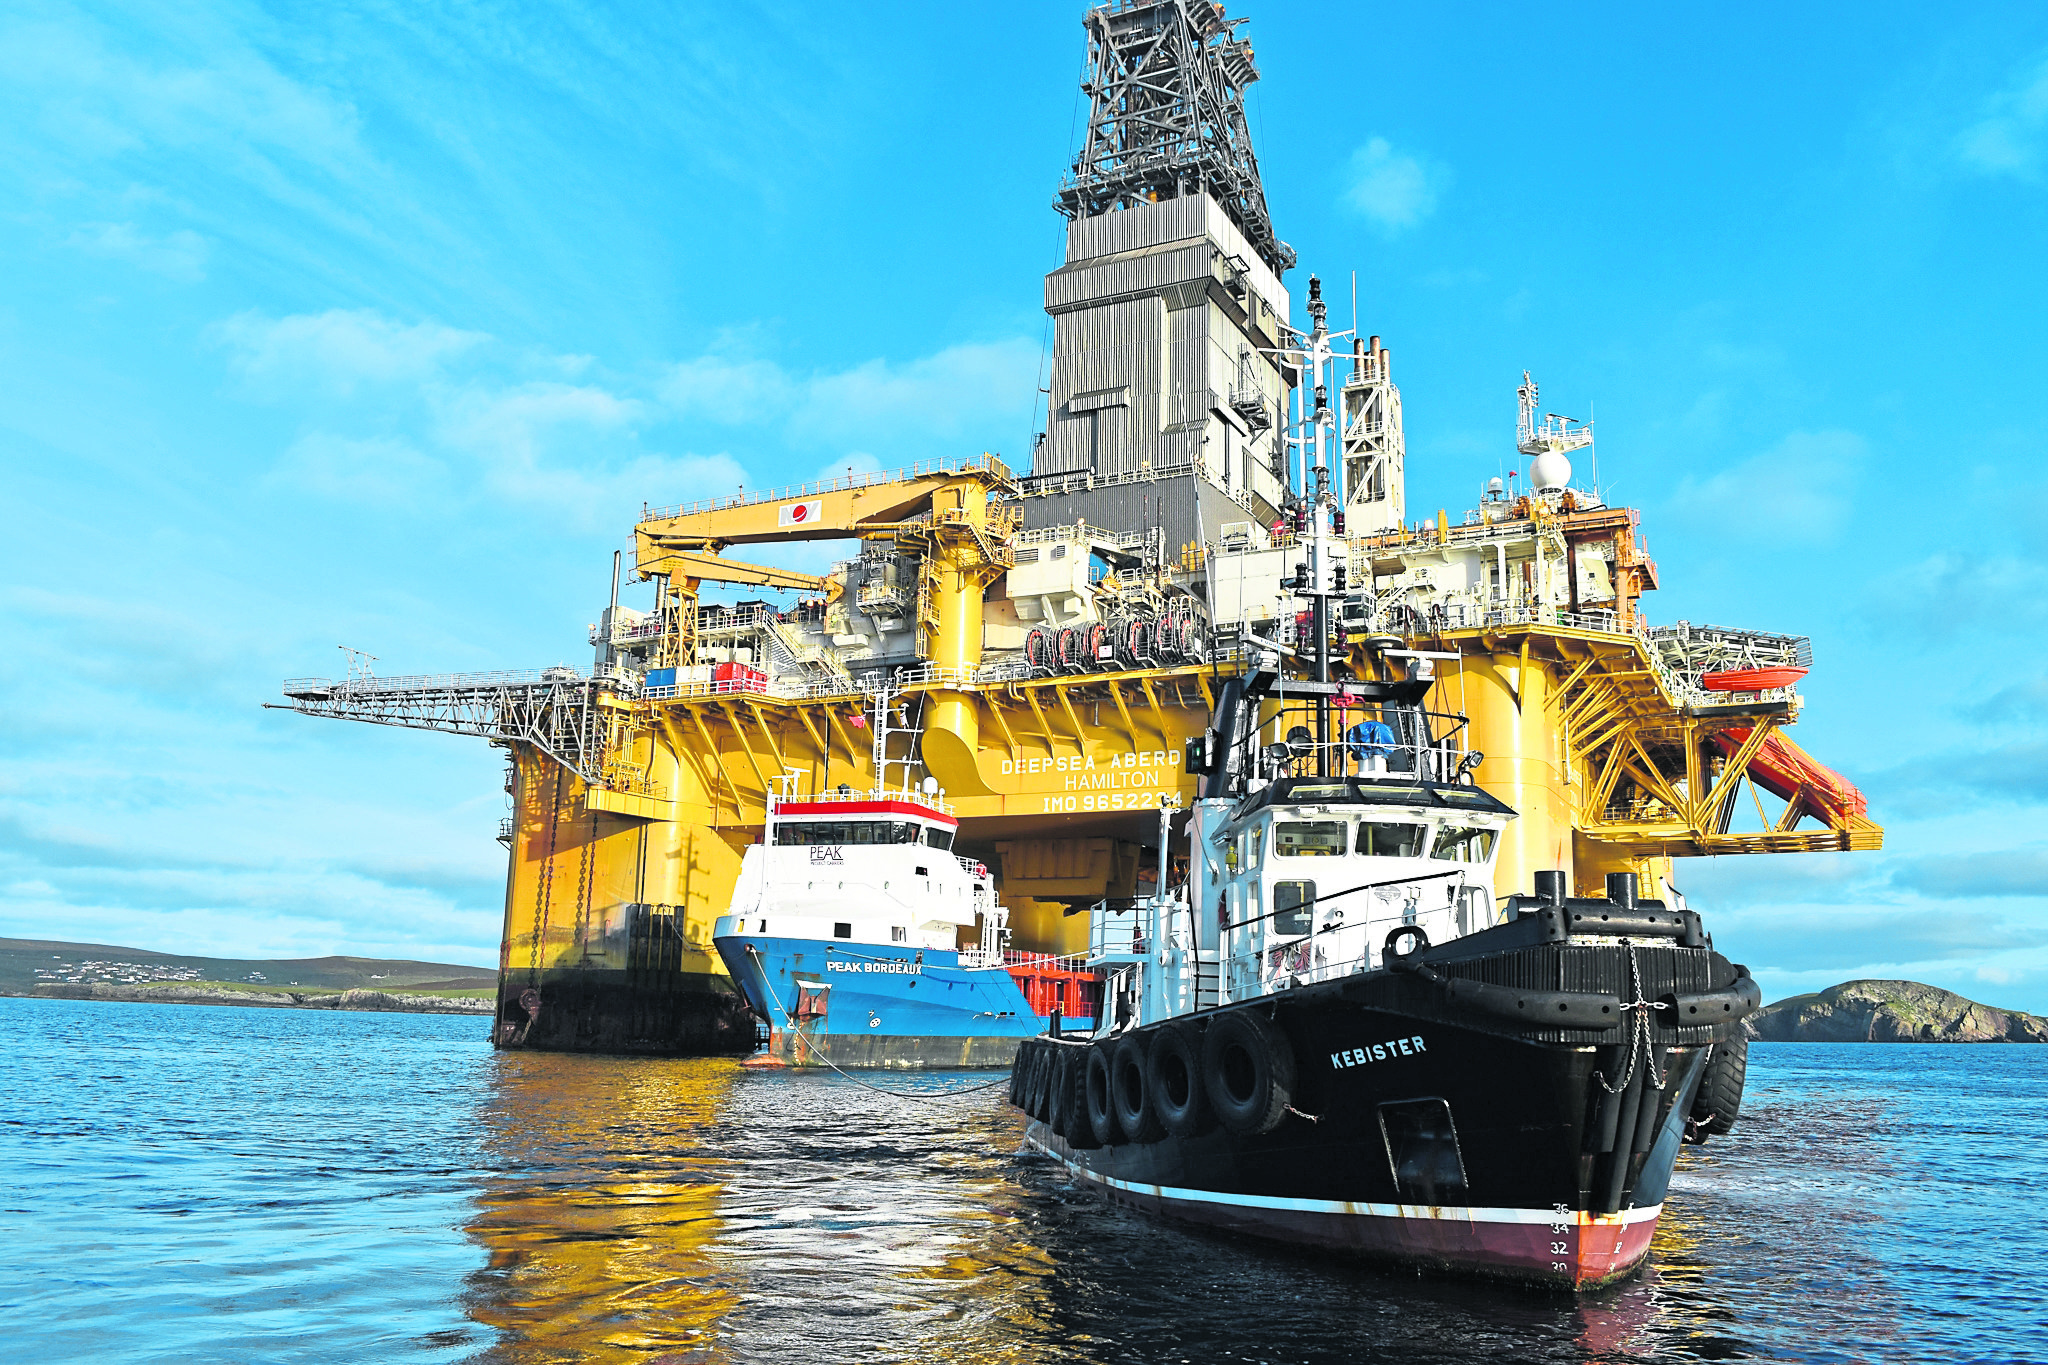 Odfjell drilling